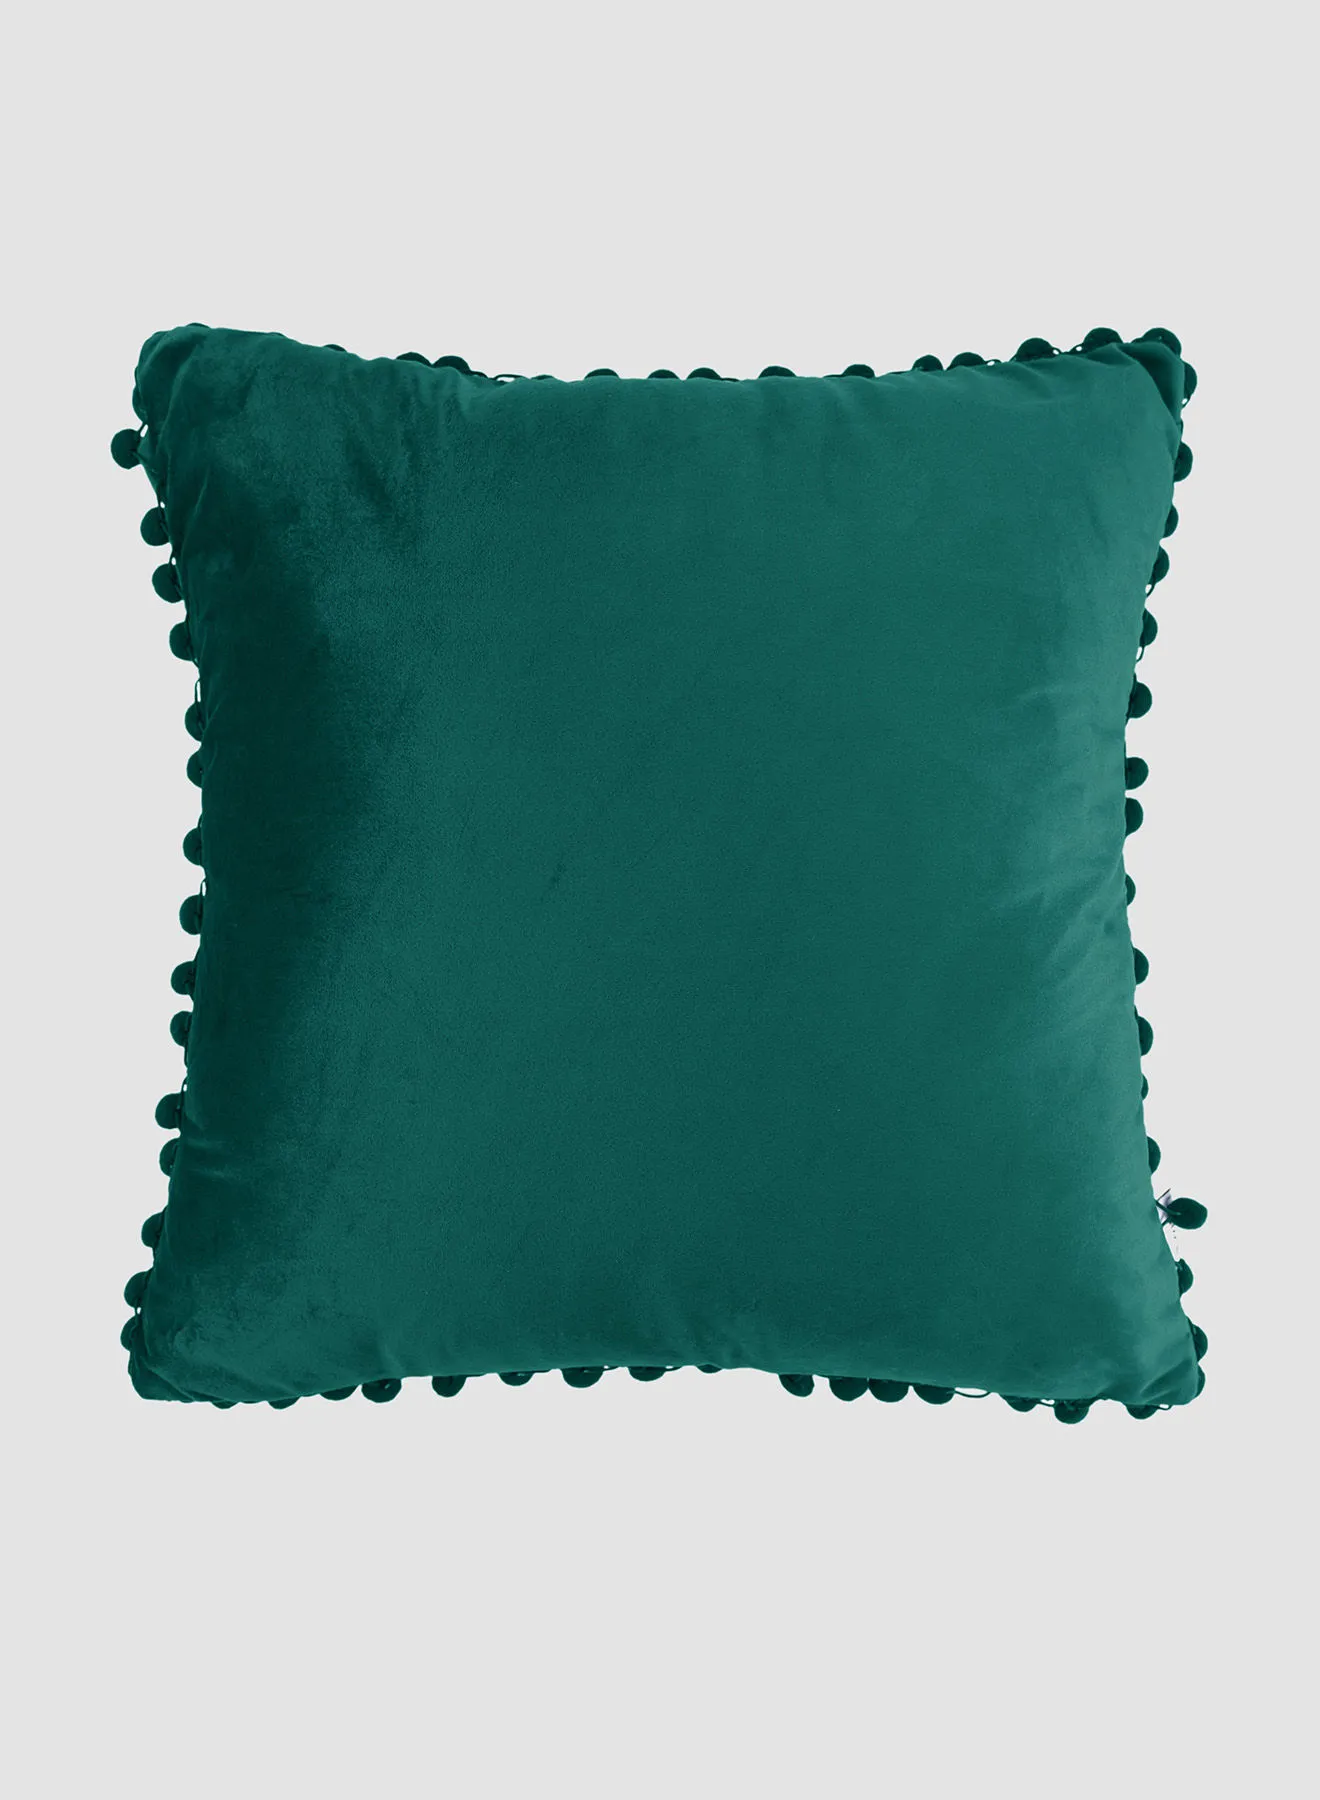 Switch Velvet Cushion  with Pom-poms, Unique Luxury Quality Decor Items for the Perfect Stylish Home Light Green 45 x 45cm